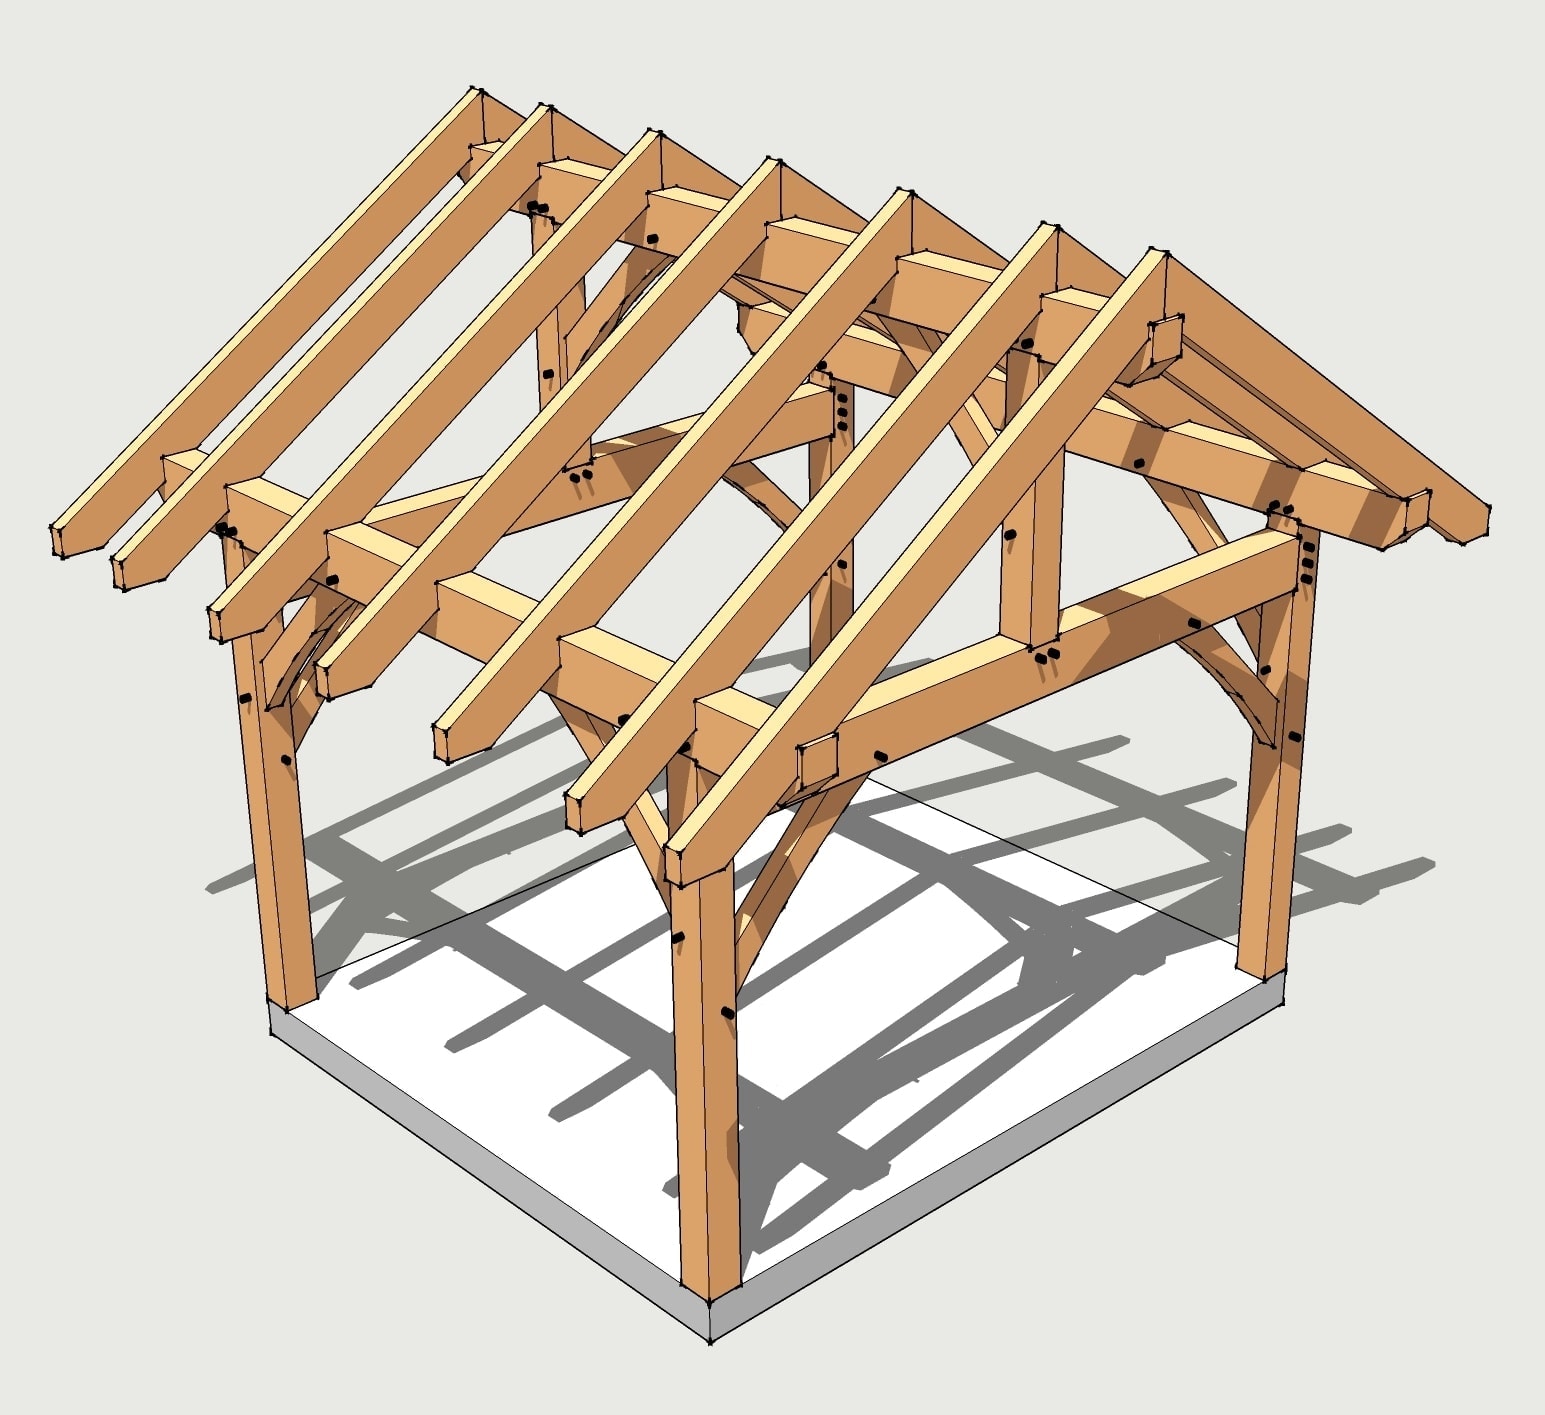 are required to frame the roof. Figure 20.4 shows an example of a roof 